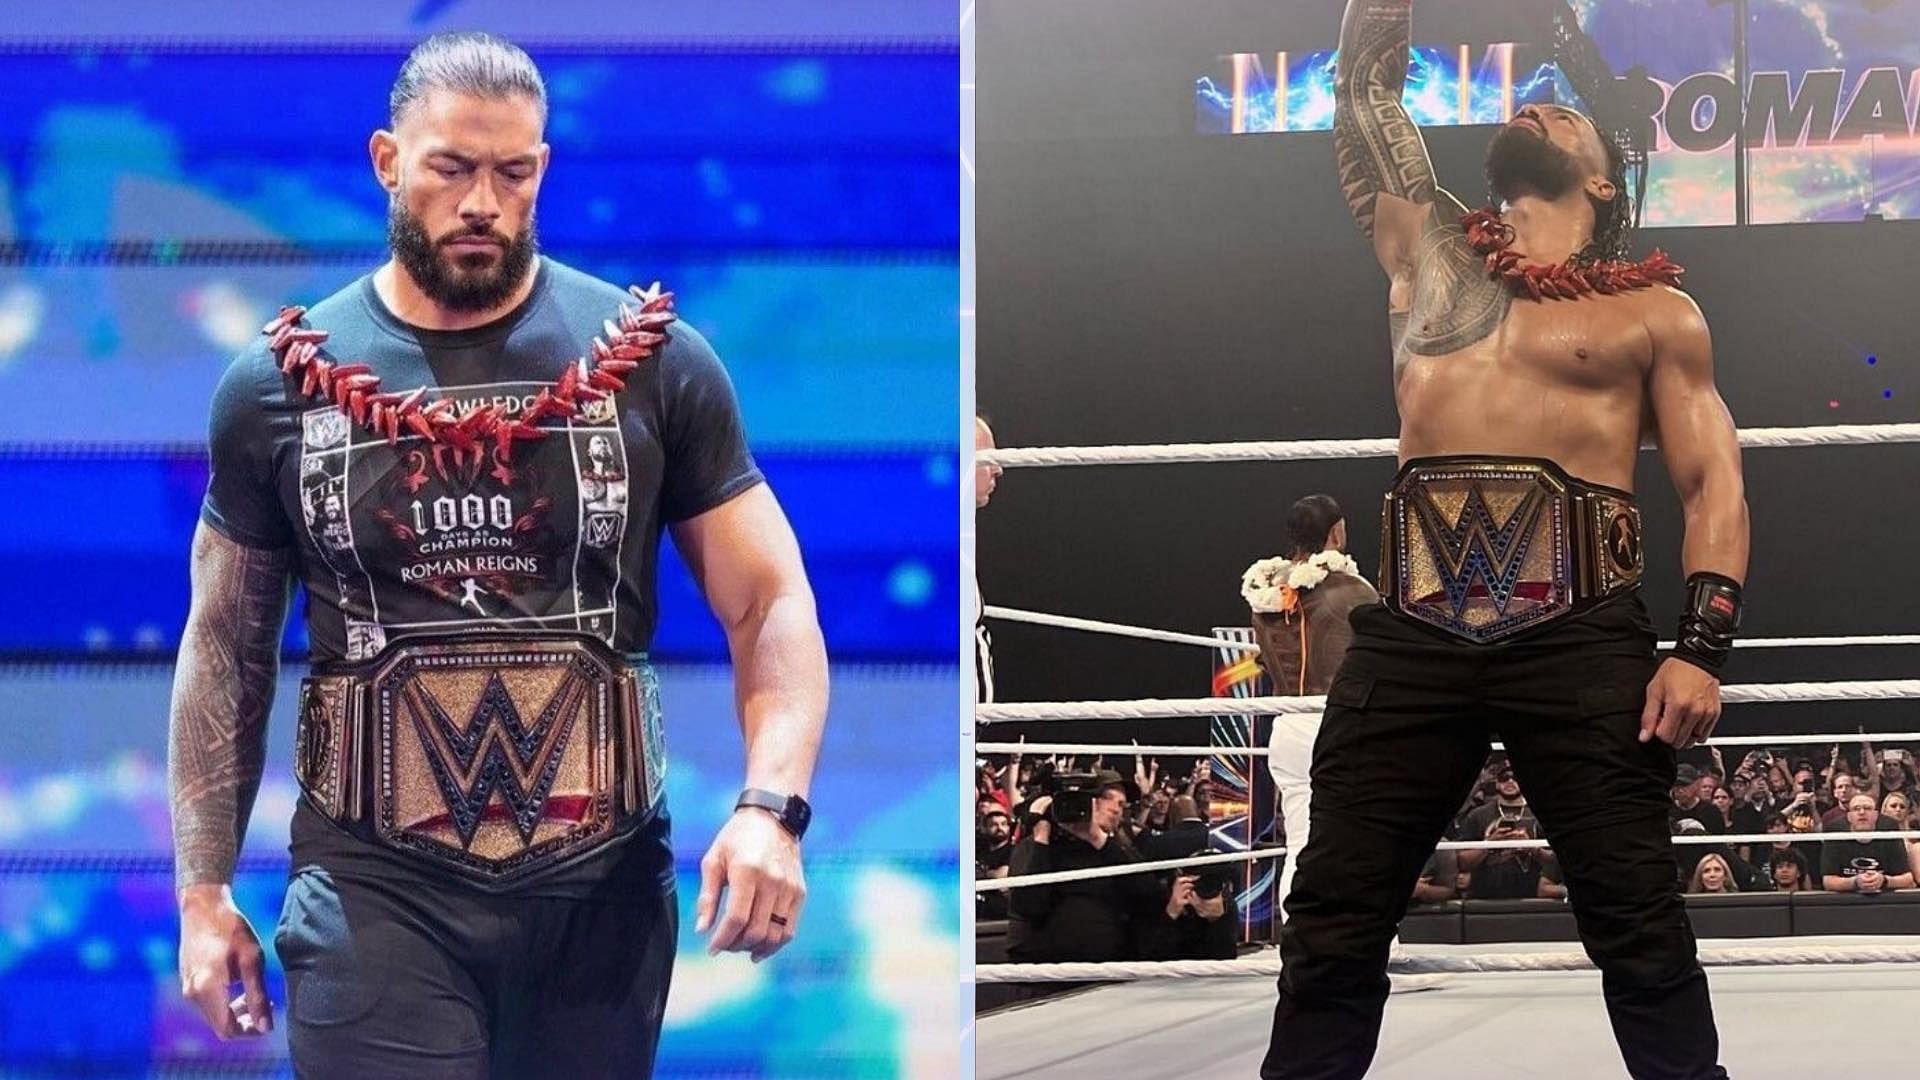 Roman Reigns is the current WWE Universal Champion